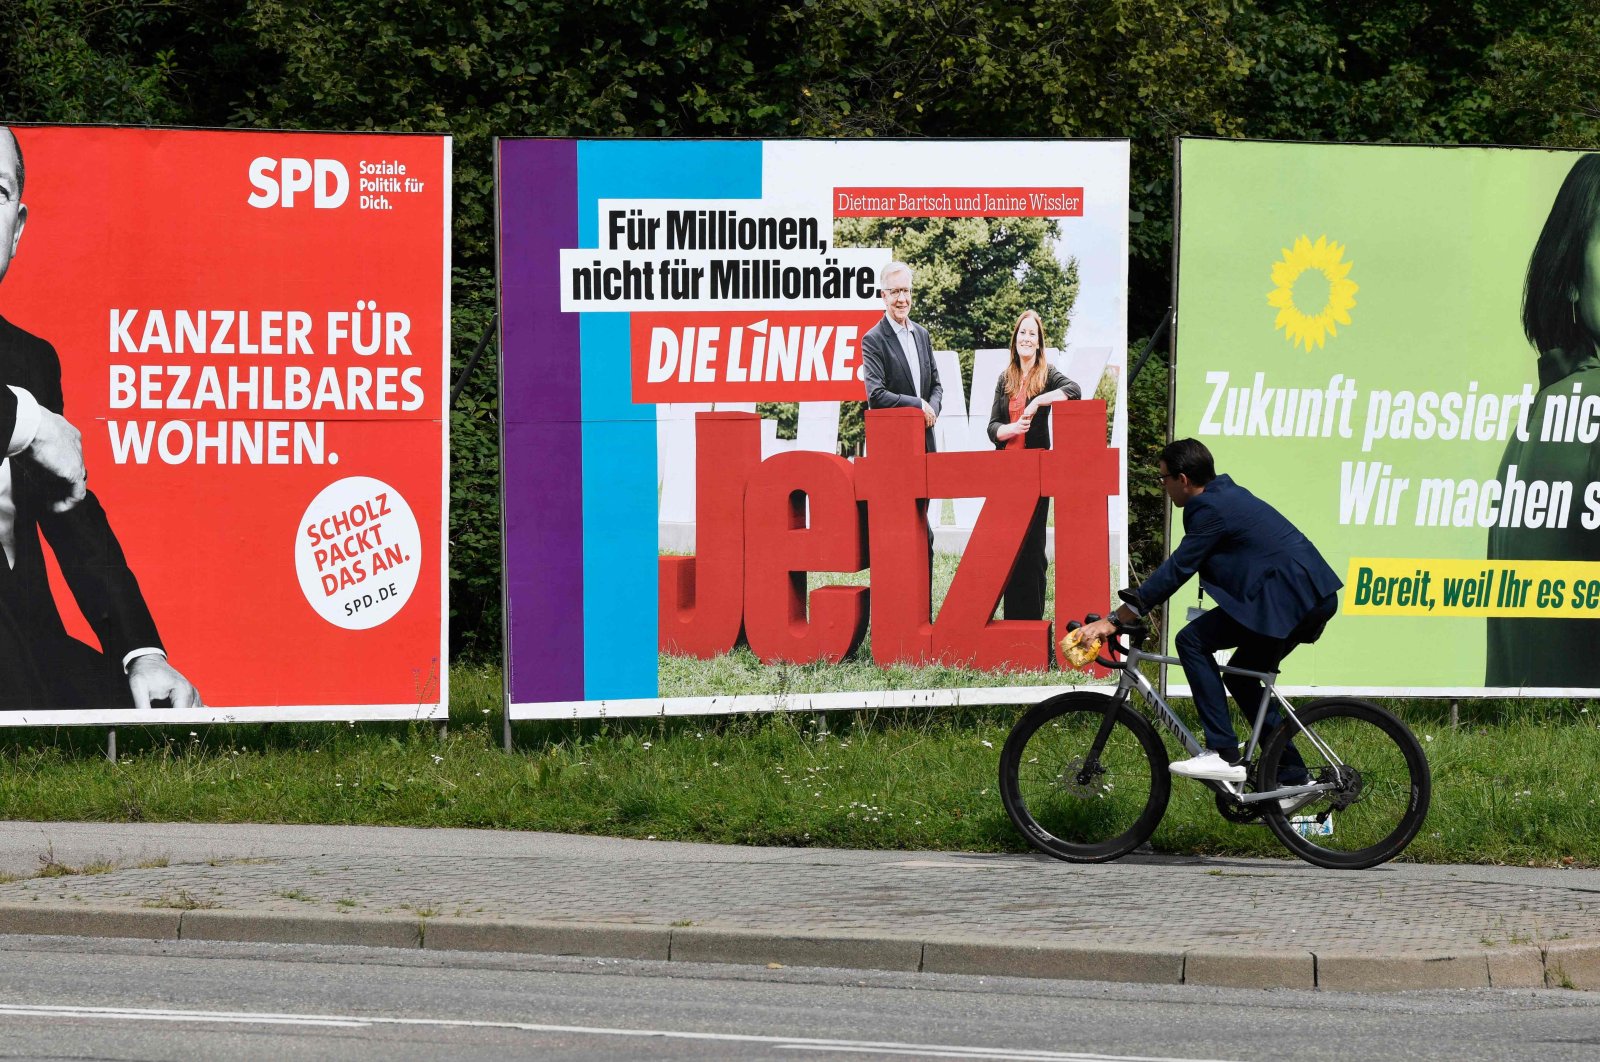 German Finance Minister, Vice-Chancellor and Social Democratic Party's (SPD) candidate for chancellor Olaf Scholz (L), Greens party co-leader and candidate for chancellor Annalena Baerbock (R) and a poster of Germany's left party Die Linke (C) in Stuttgart, southern Germany, Sept. 1, 2021, ahead of parliamentary elections on Sept. 26. (AFP Photo)